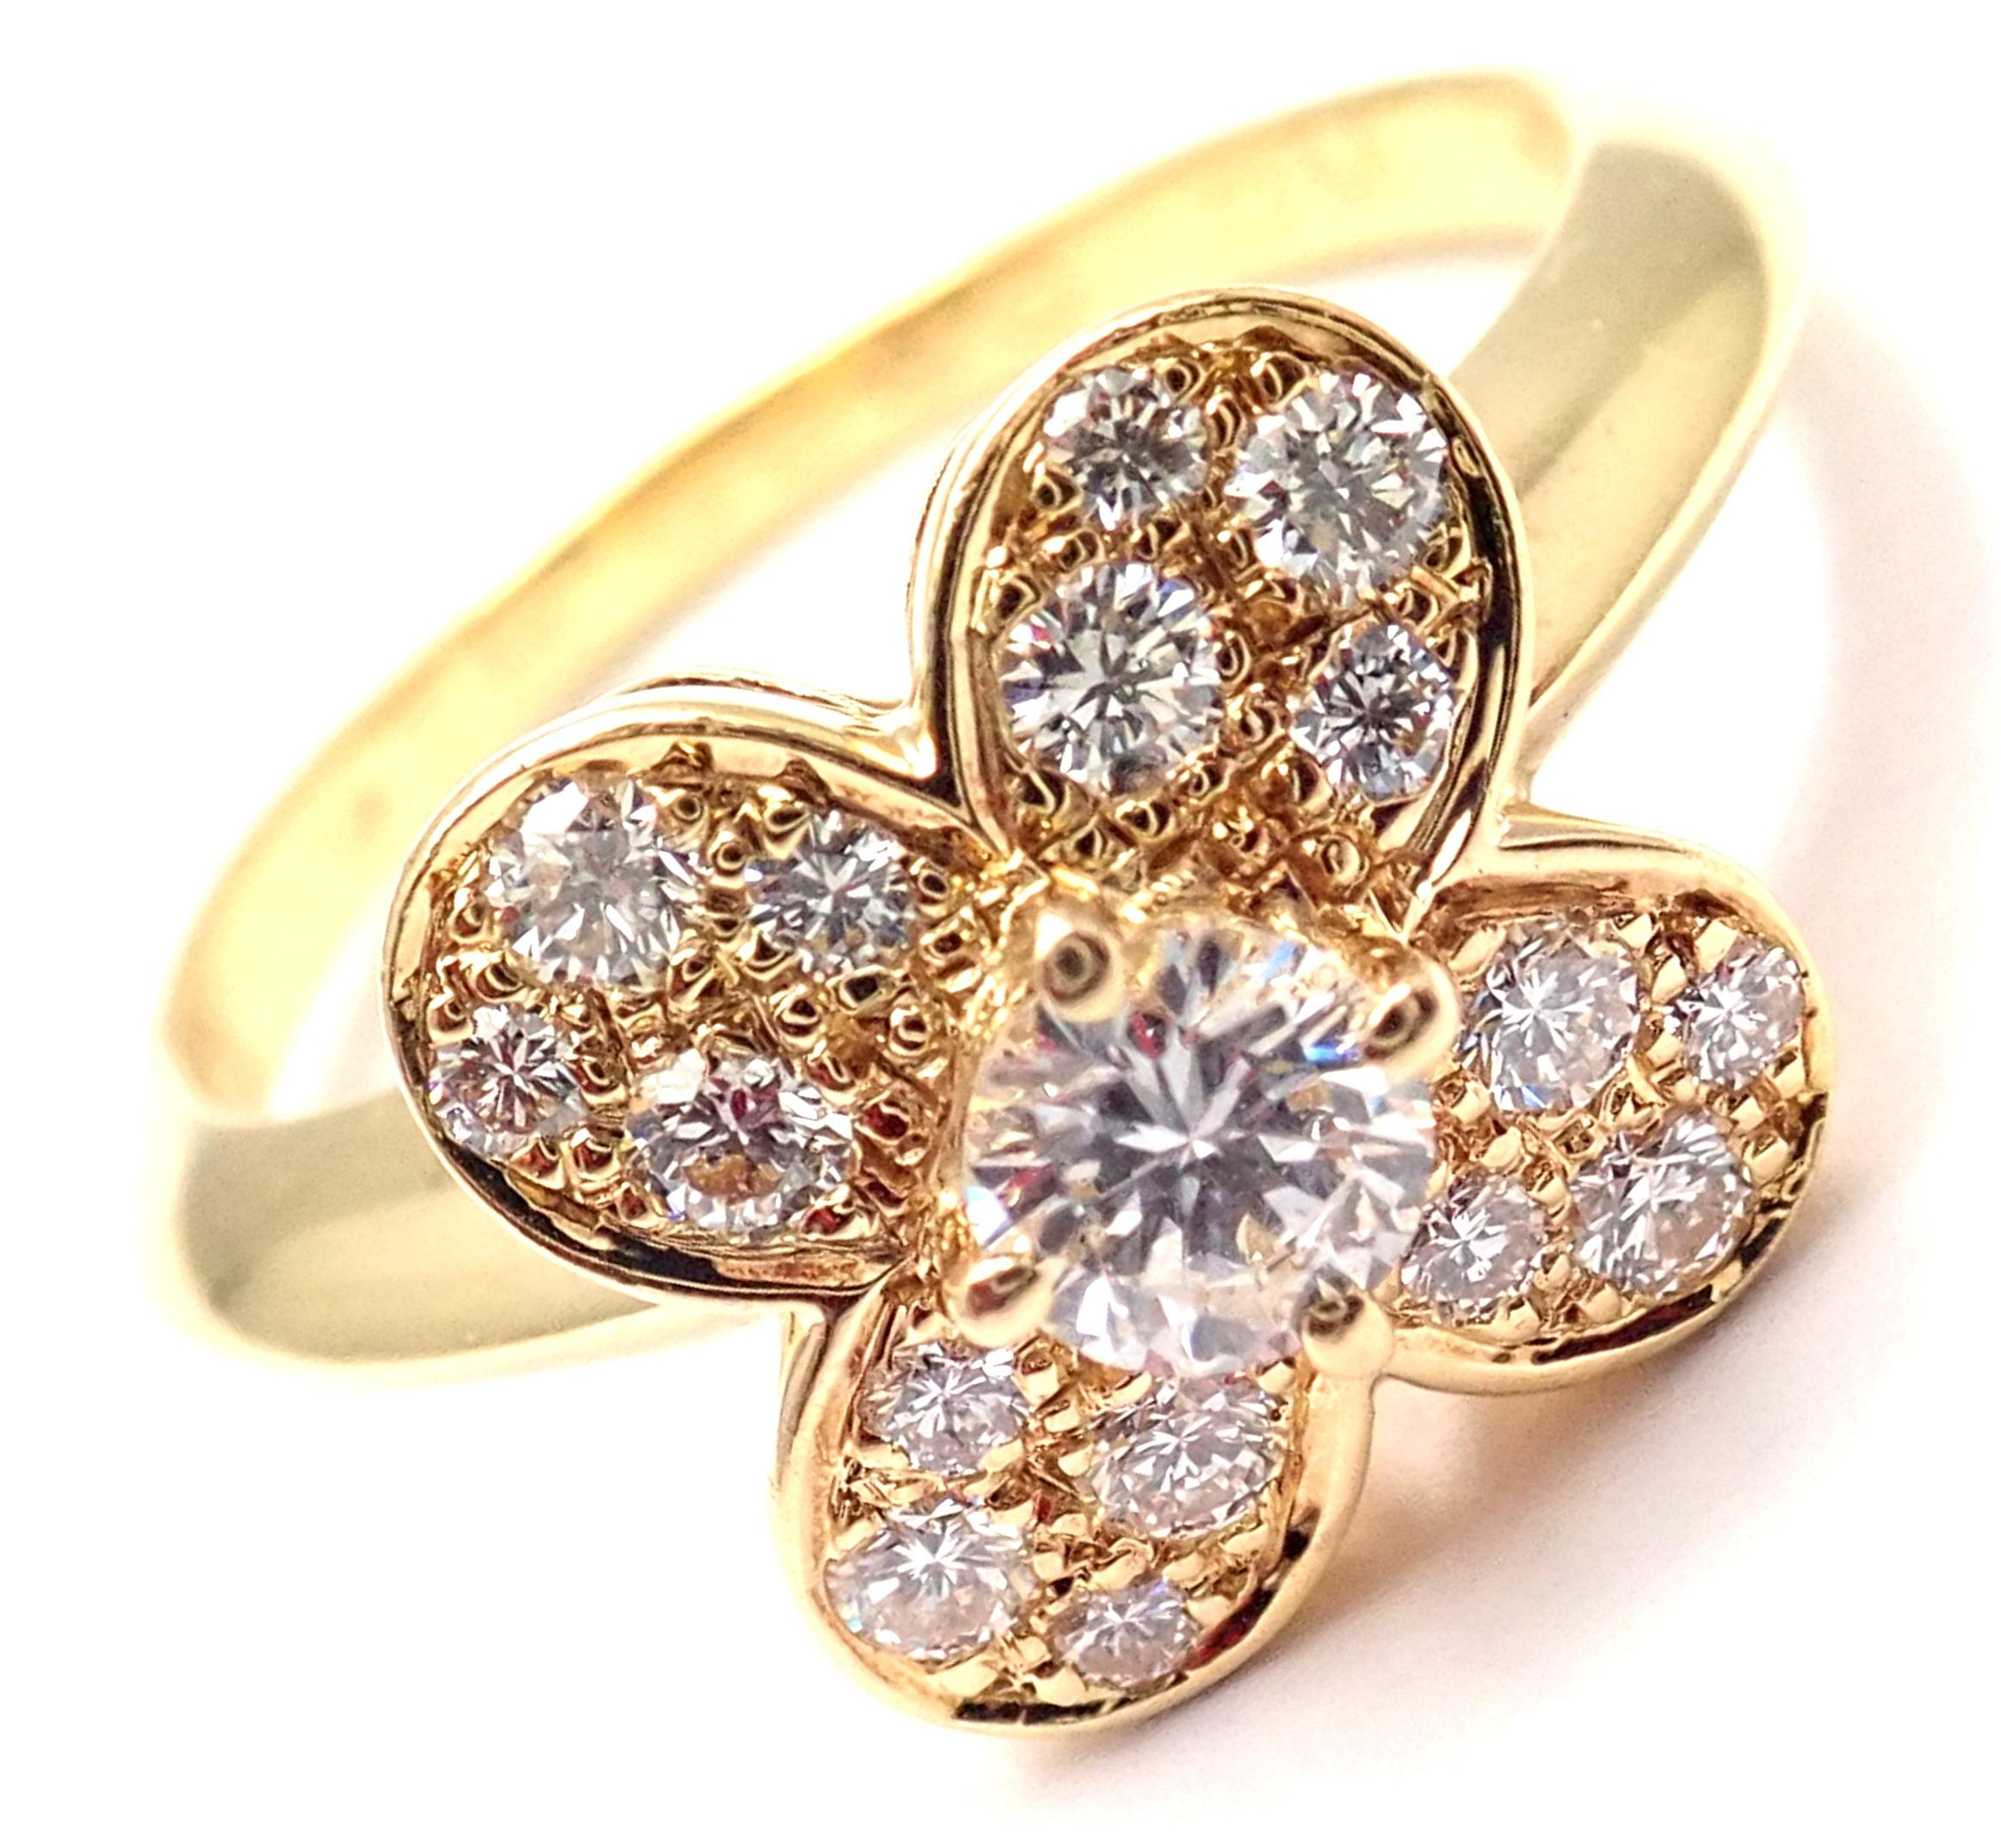 18k Yellow Gold Diamond Trefle Clover Ring by Van Cleef & Arpels.
With 17 round brilliant cut diamonds approx .75ct total weight VS1 clarity, G color
This ring comes with Van Cleef & Arpels certificate of authenticity and a box.
Details:
Size: